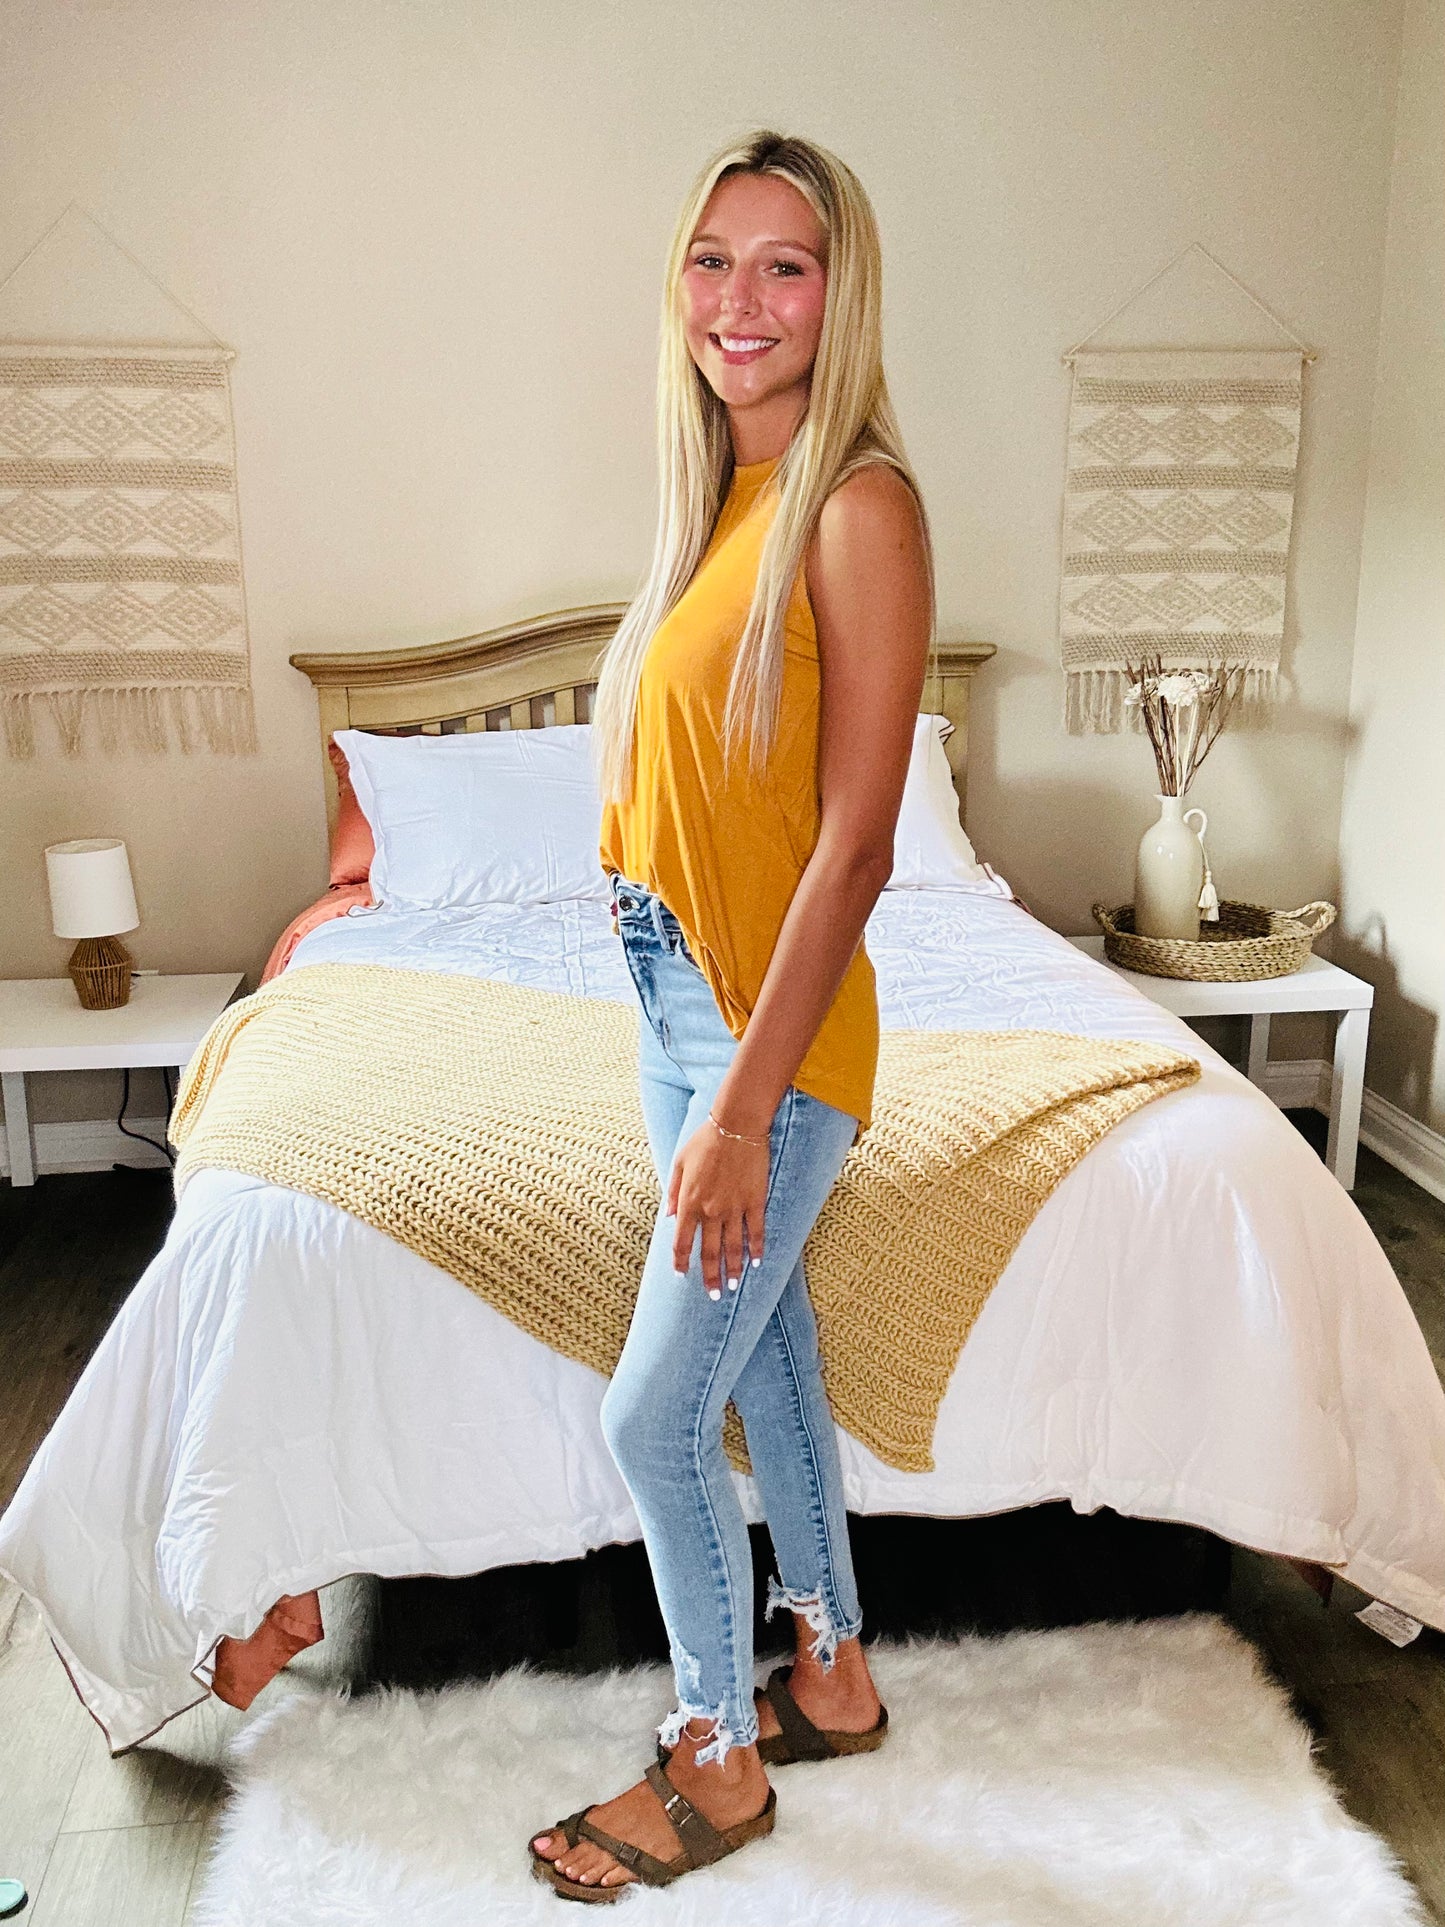 Can't Wait for Spring Hi-Low Sleeveless Top in Mustard